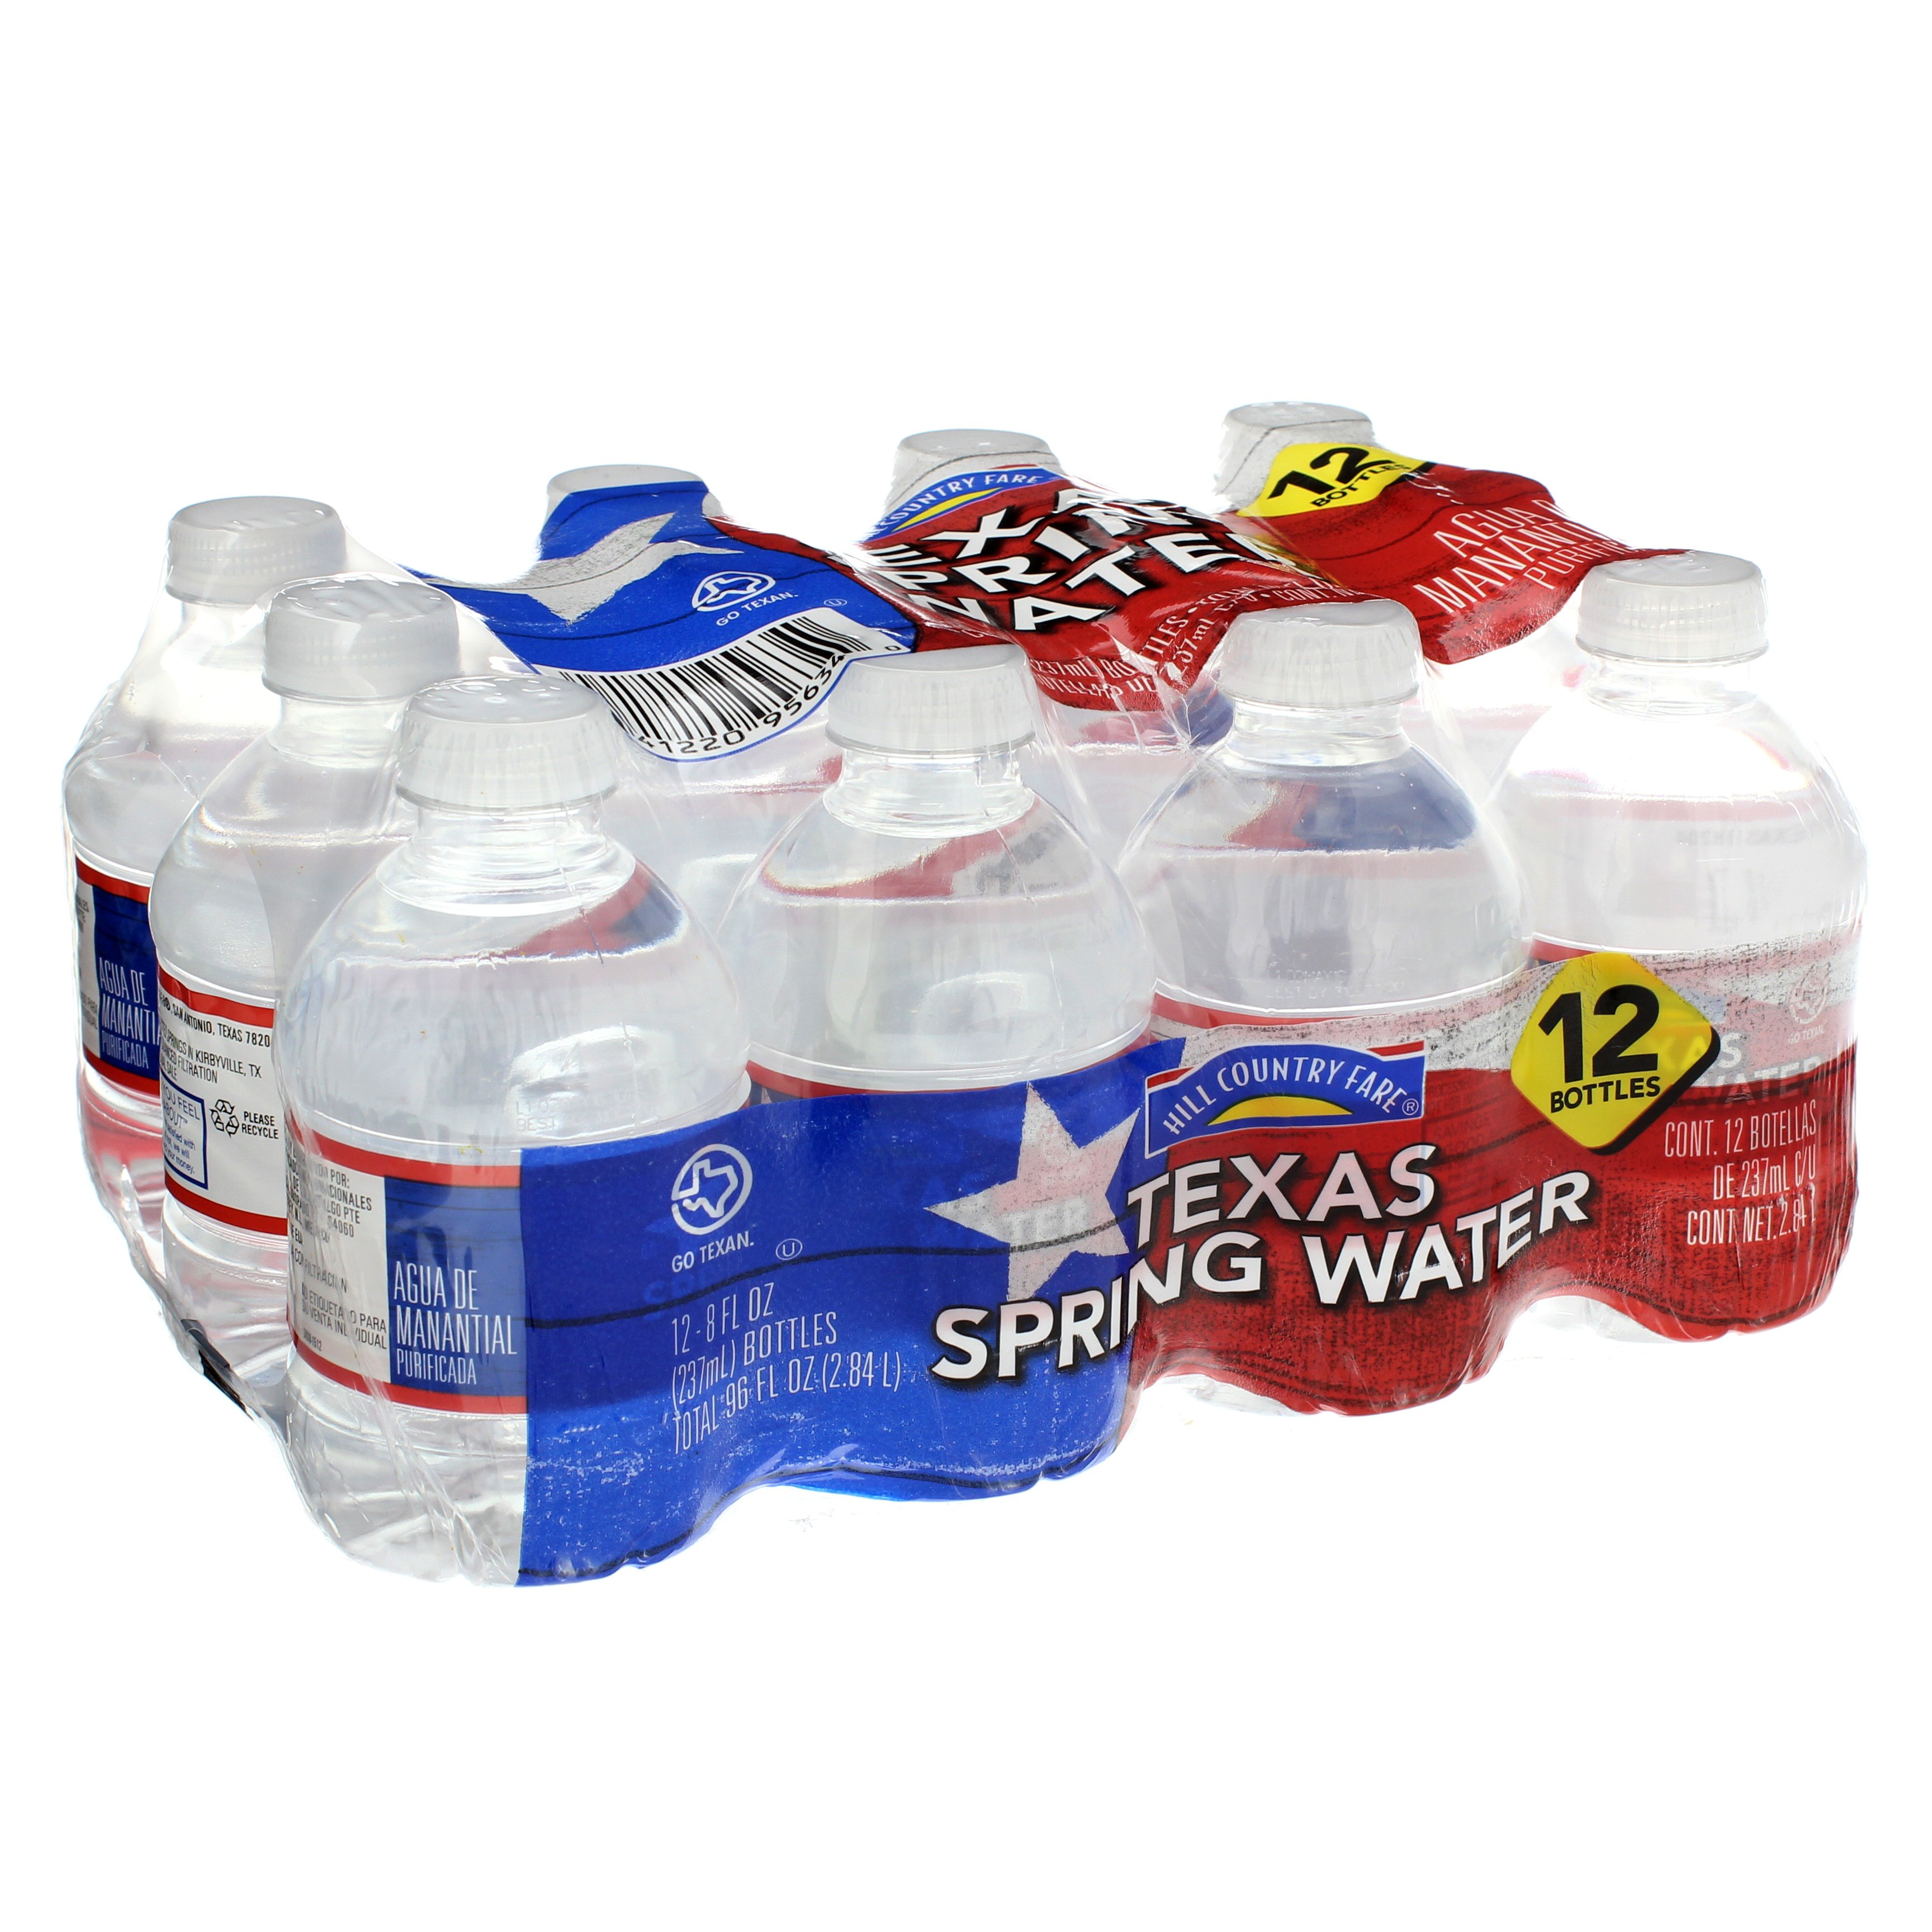 Hill Country Fare Spring Water 8 oz Bottles